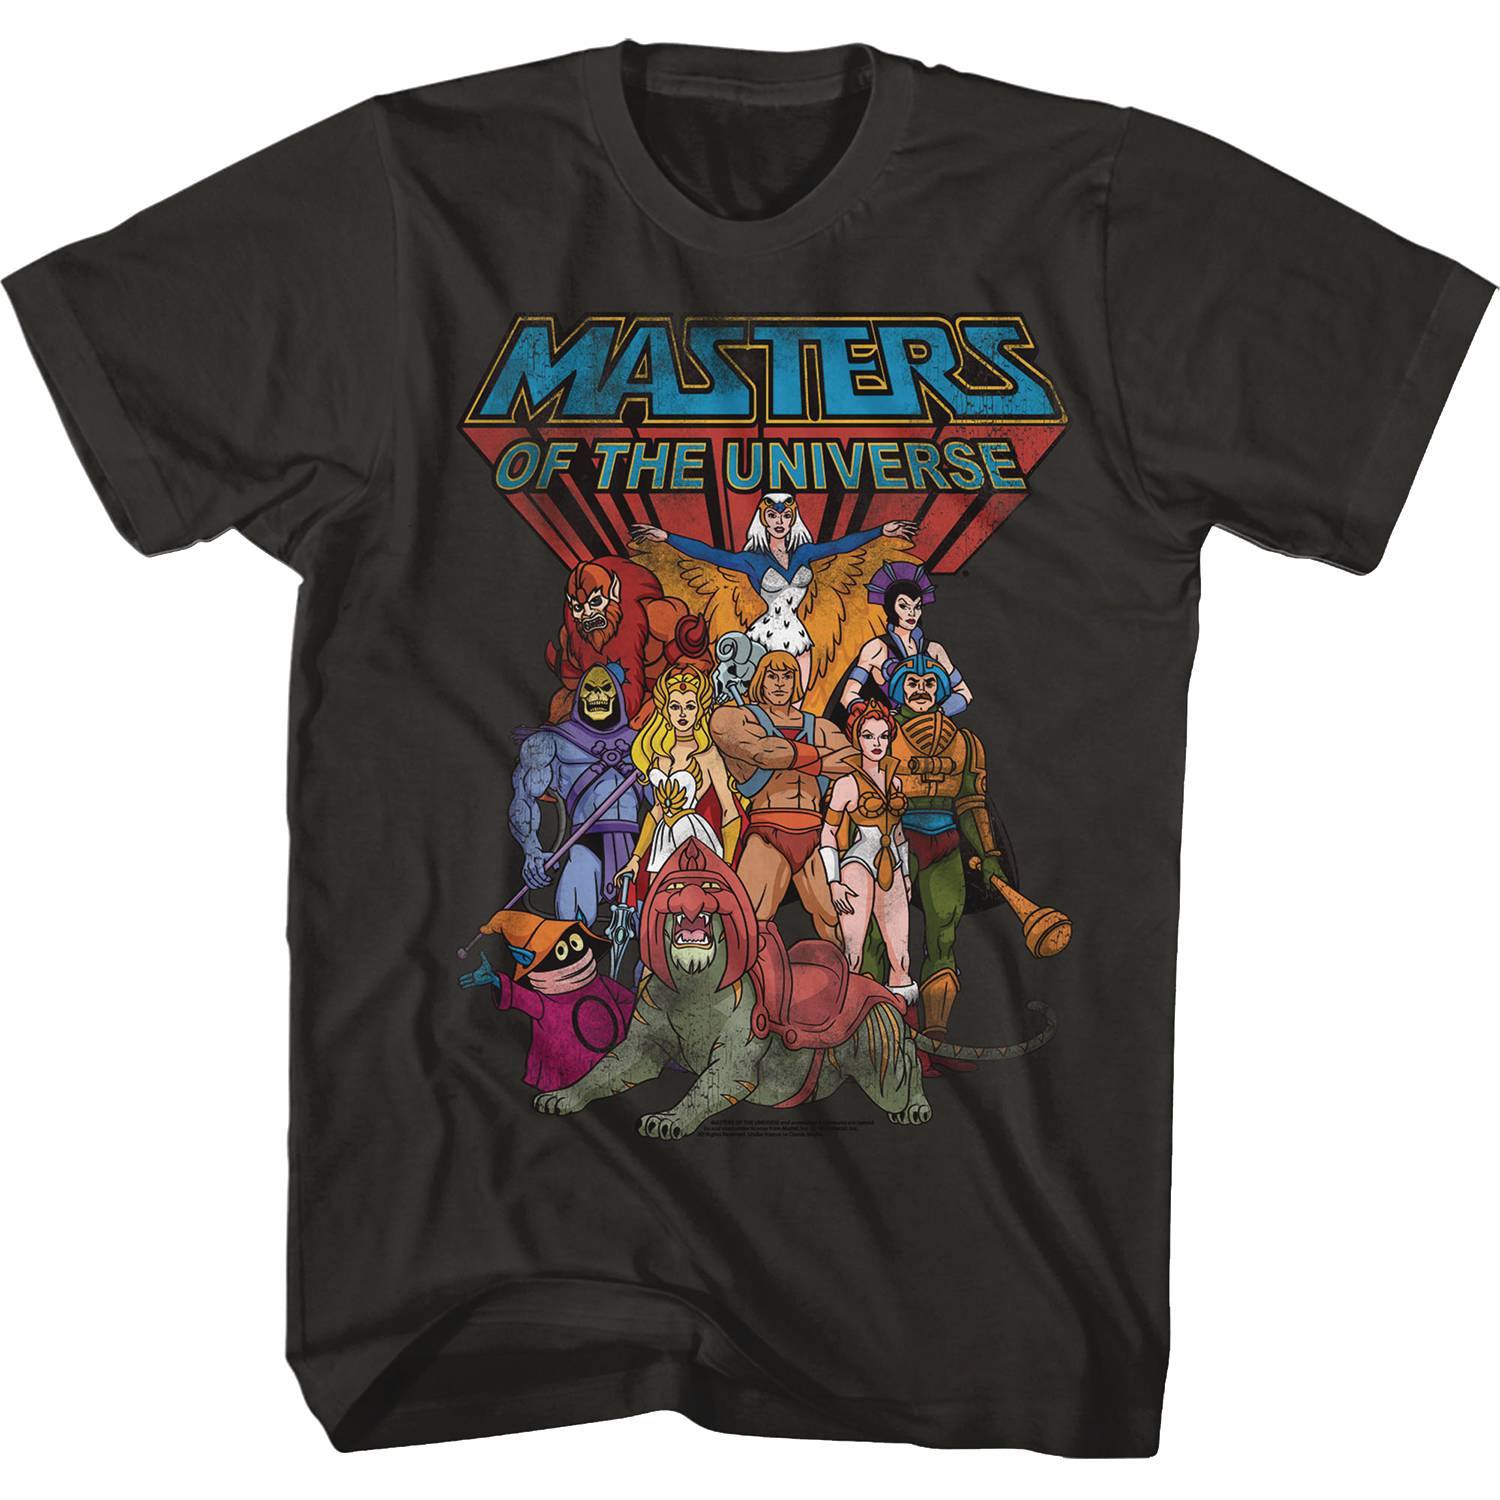 NOV222318 - MASTERS OF THE UNIVERSE THE WHOLE GANG T/S SM - Previews World